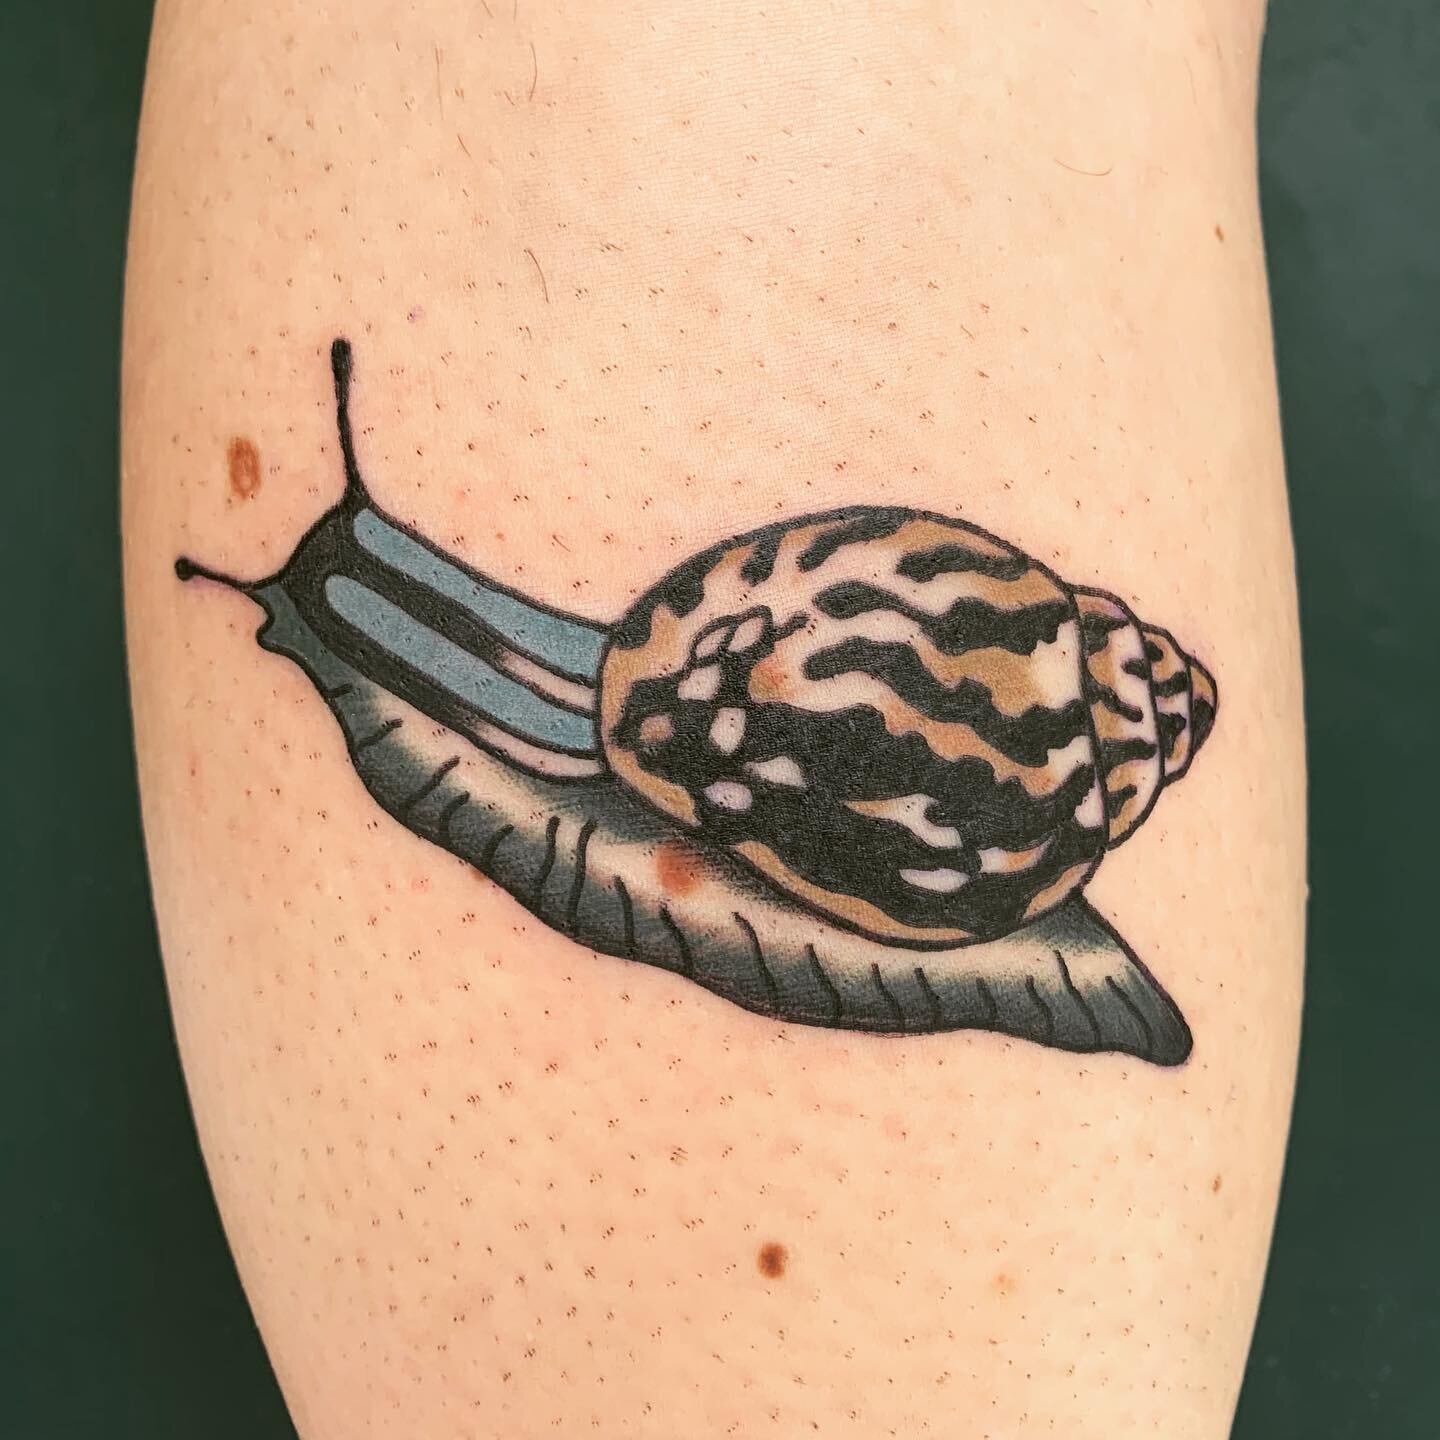 I only tattoo snails now. Thanks for coming through, Eileen!

#seattle #pnw #pacificnorthwest #seattletattoo #seattletattoos #seattleartist #seattlelife #portland #portlandlife #portlandtattoo #portlandartist #portlandtattooartist #bellevue #edmonds 